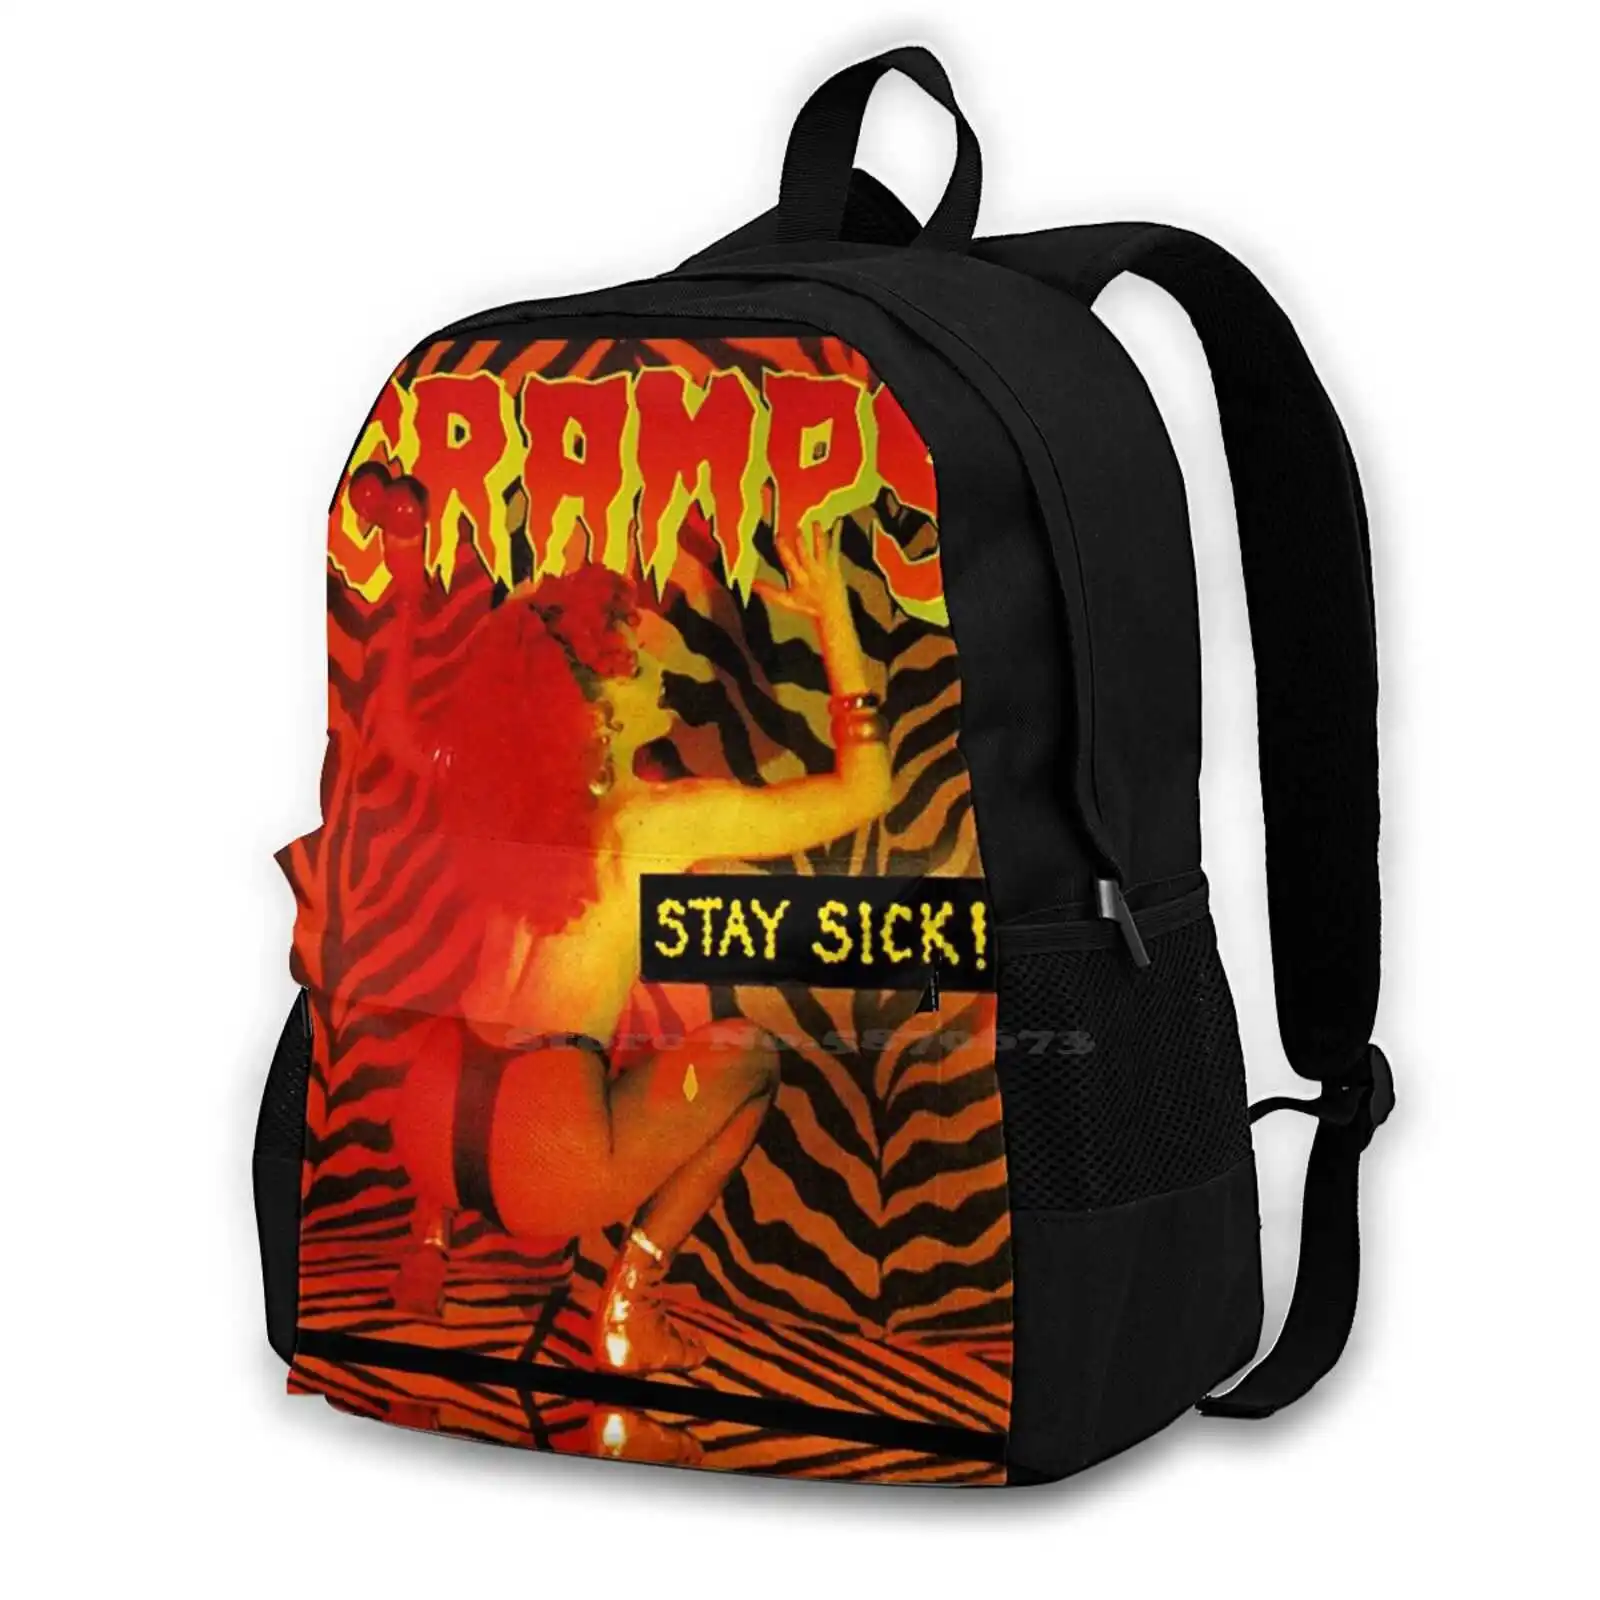 The Cramps / Stay Sick Fashion Bags Backpacks The Cramps Cover Album Stay Sick And Roll Psychobilly Goth Music Samvelvet 60S